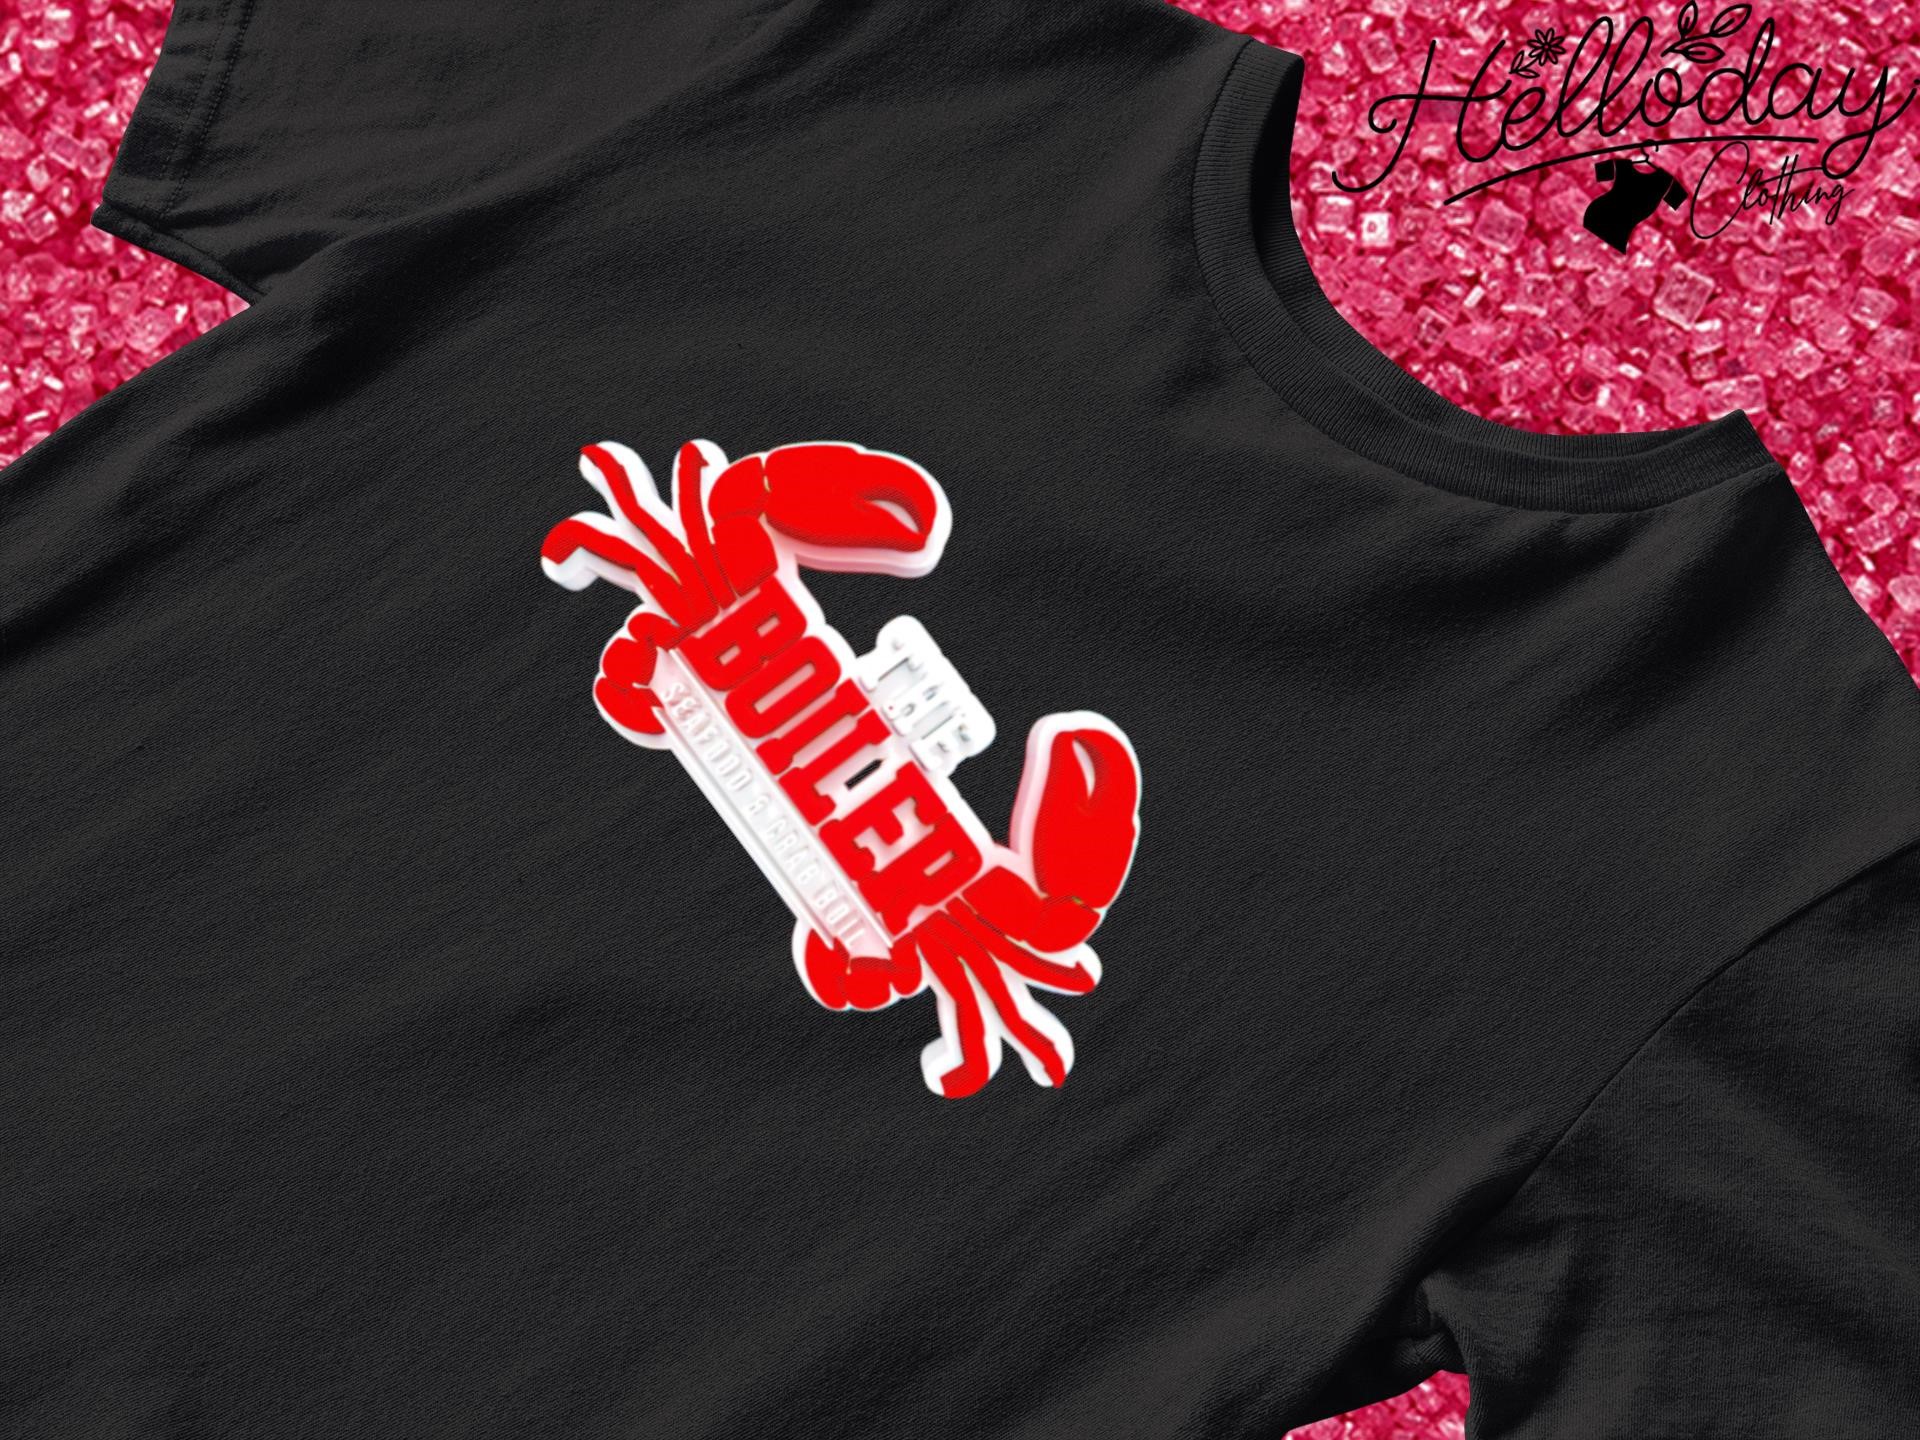 The Boiler Seafood and Crab Boil shirt